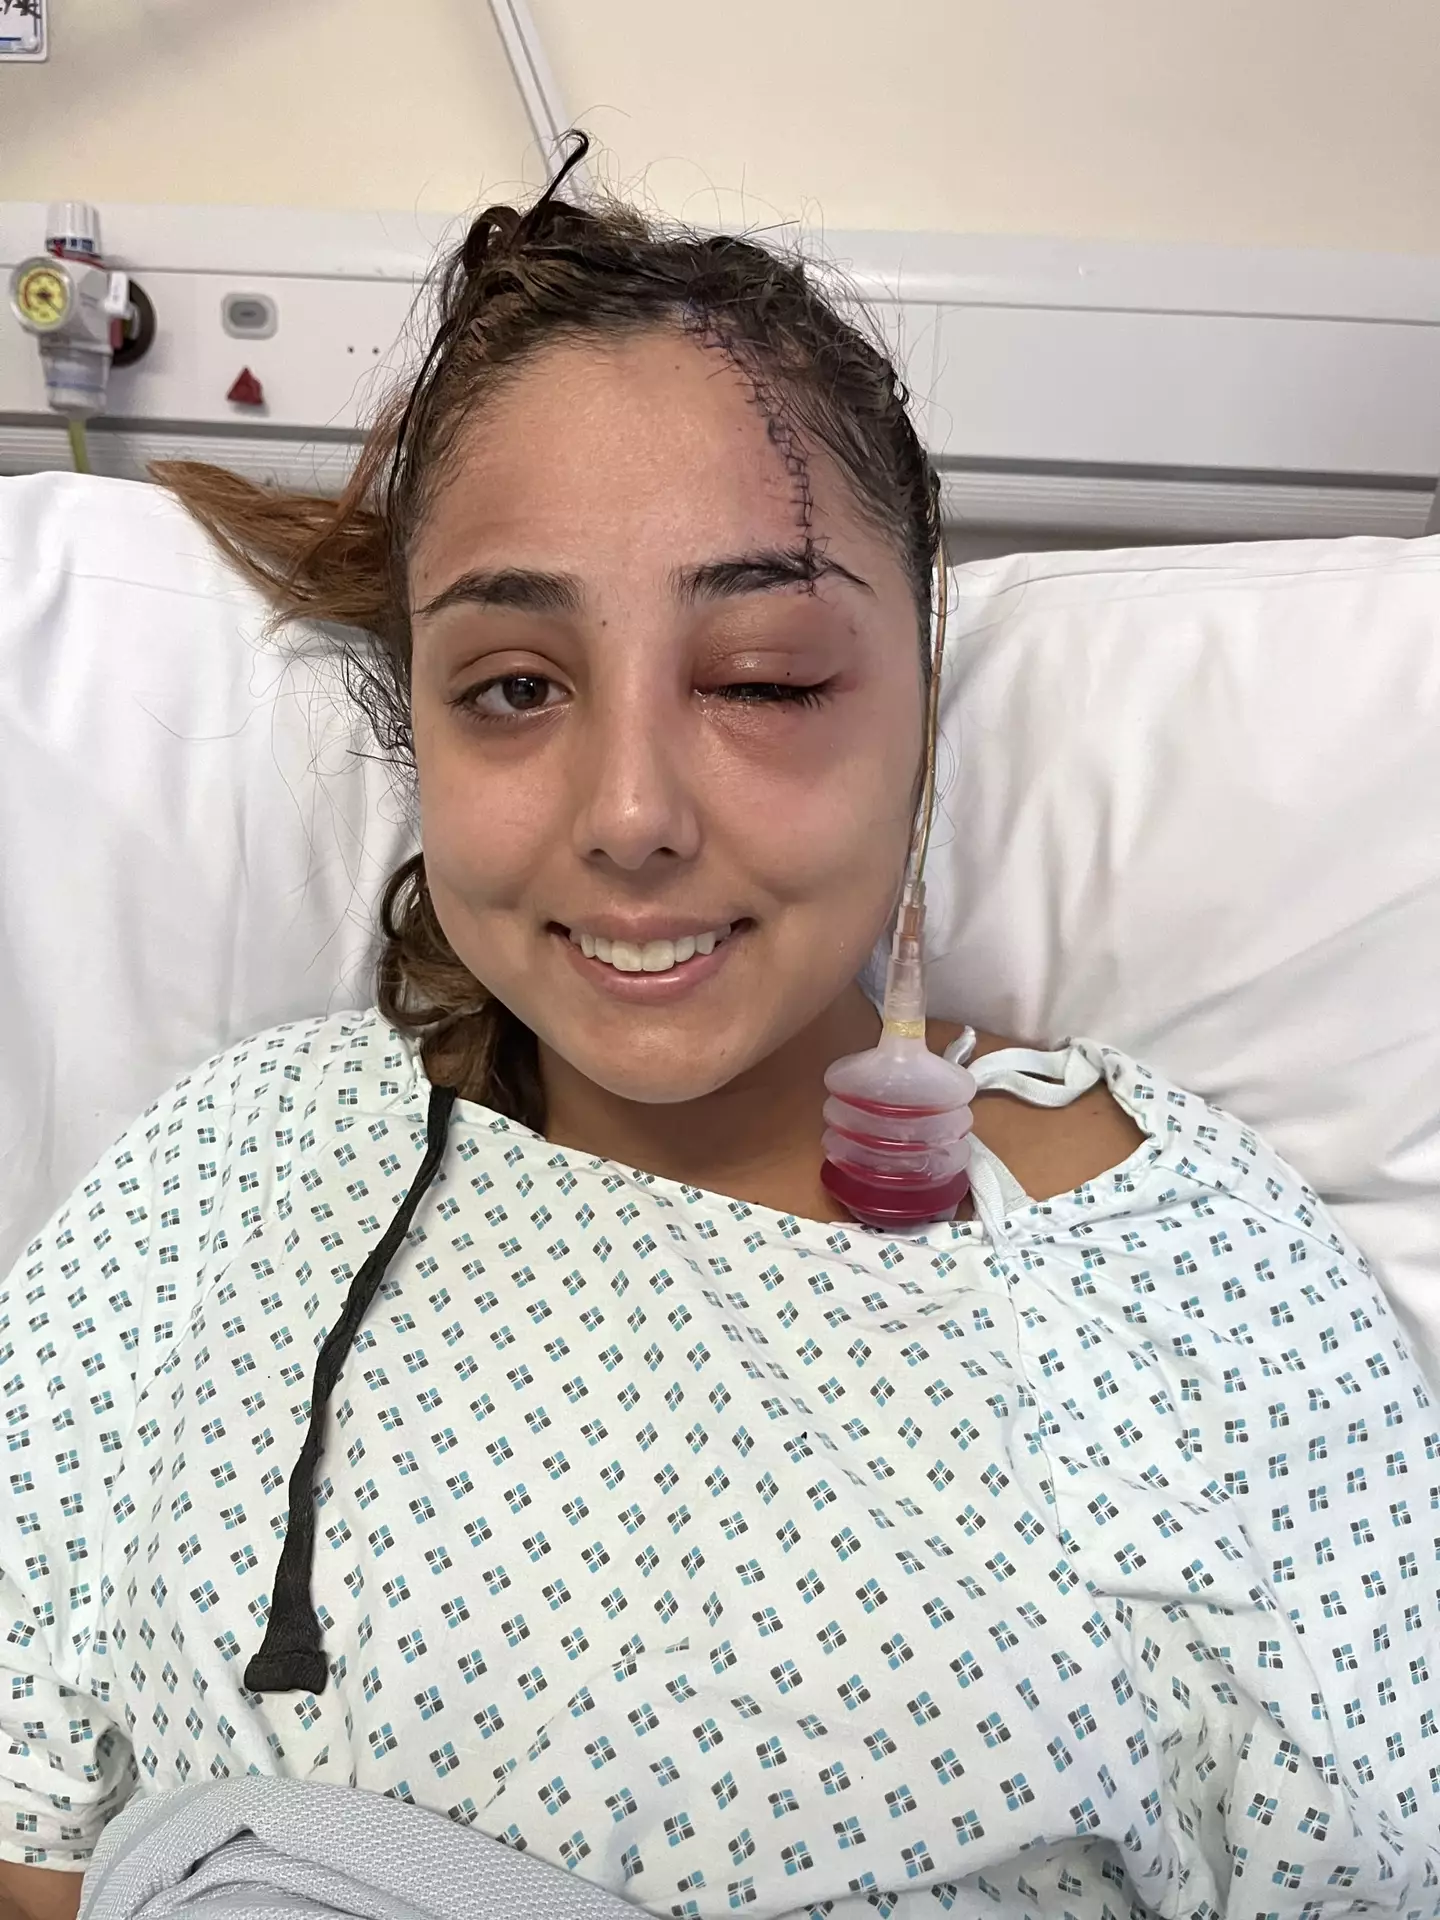 The horrific incident occurred when Jeena Panesar lost control of the car while driving home from work in Swadlincote, Derbyshire on January 24th.